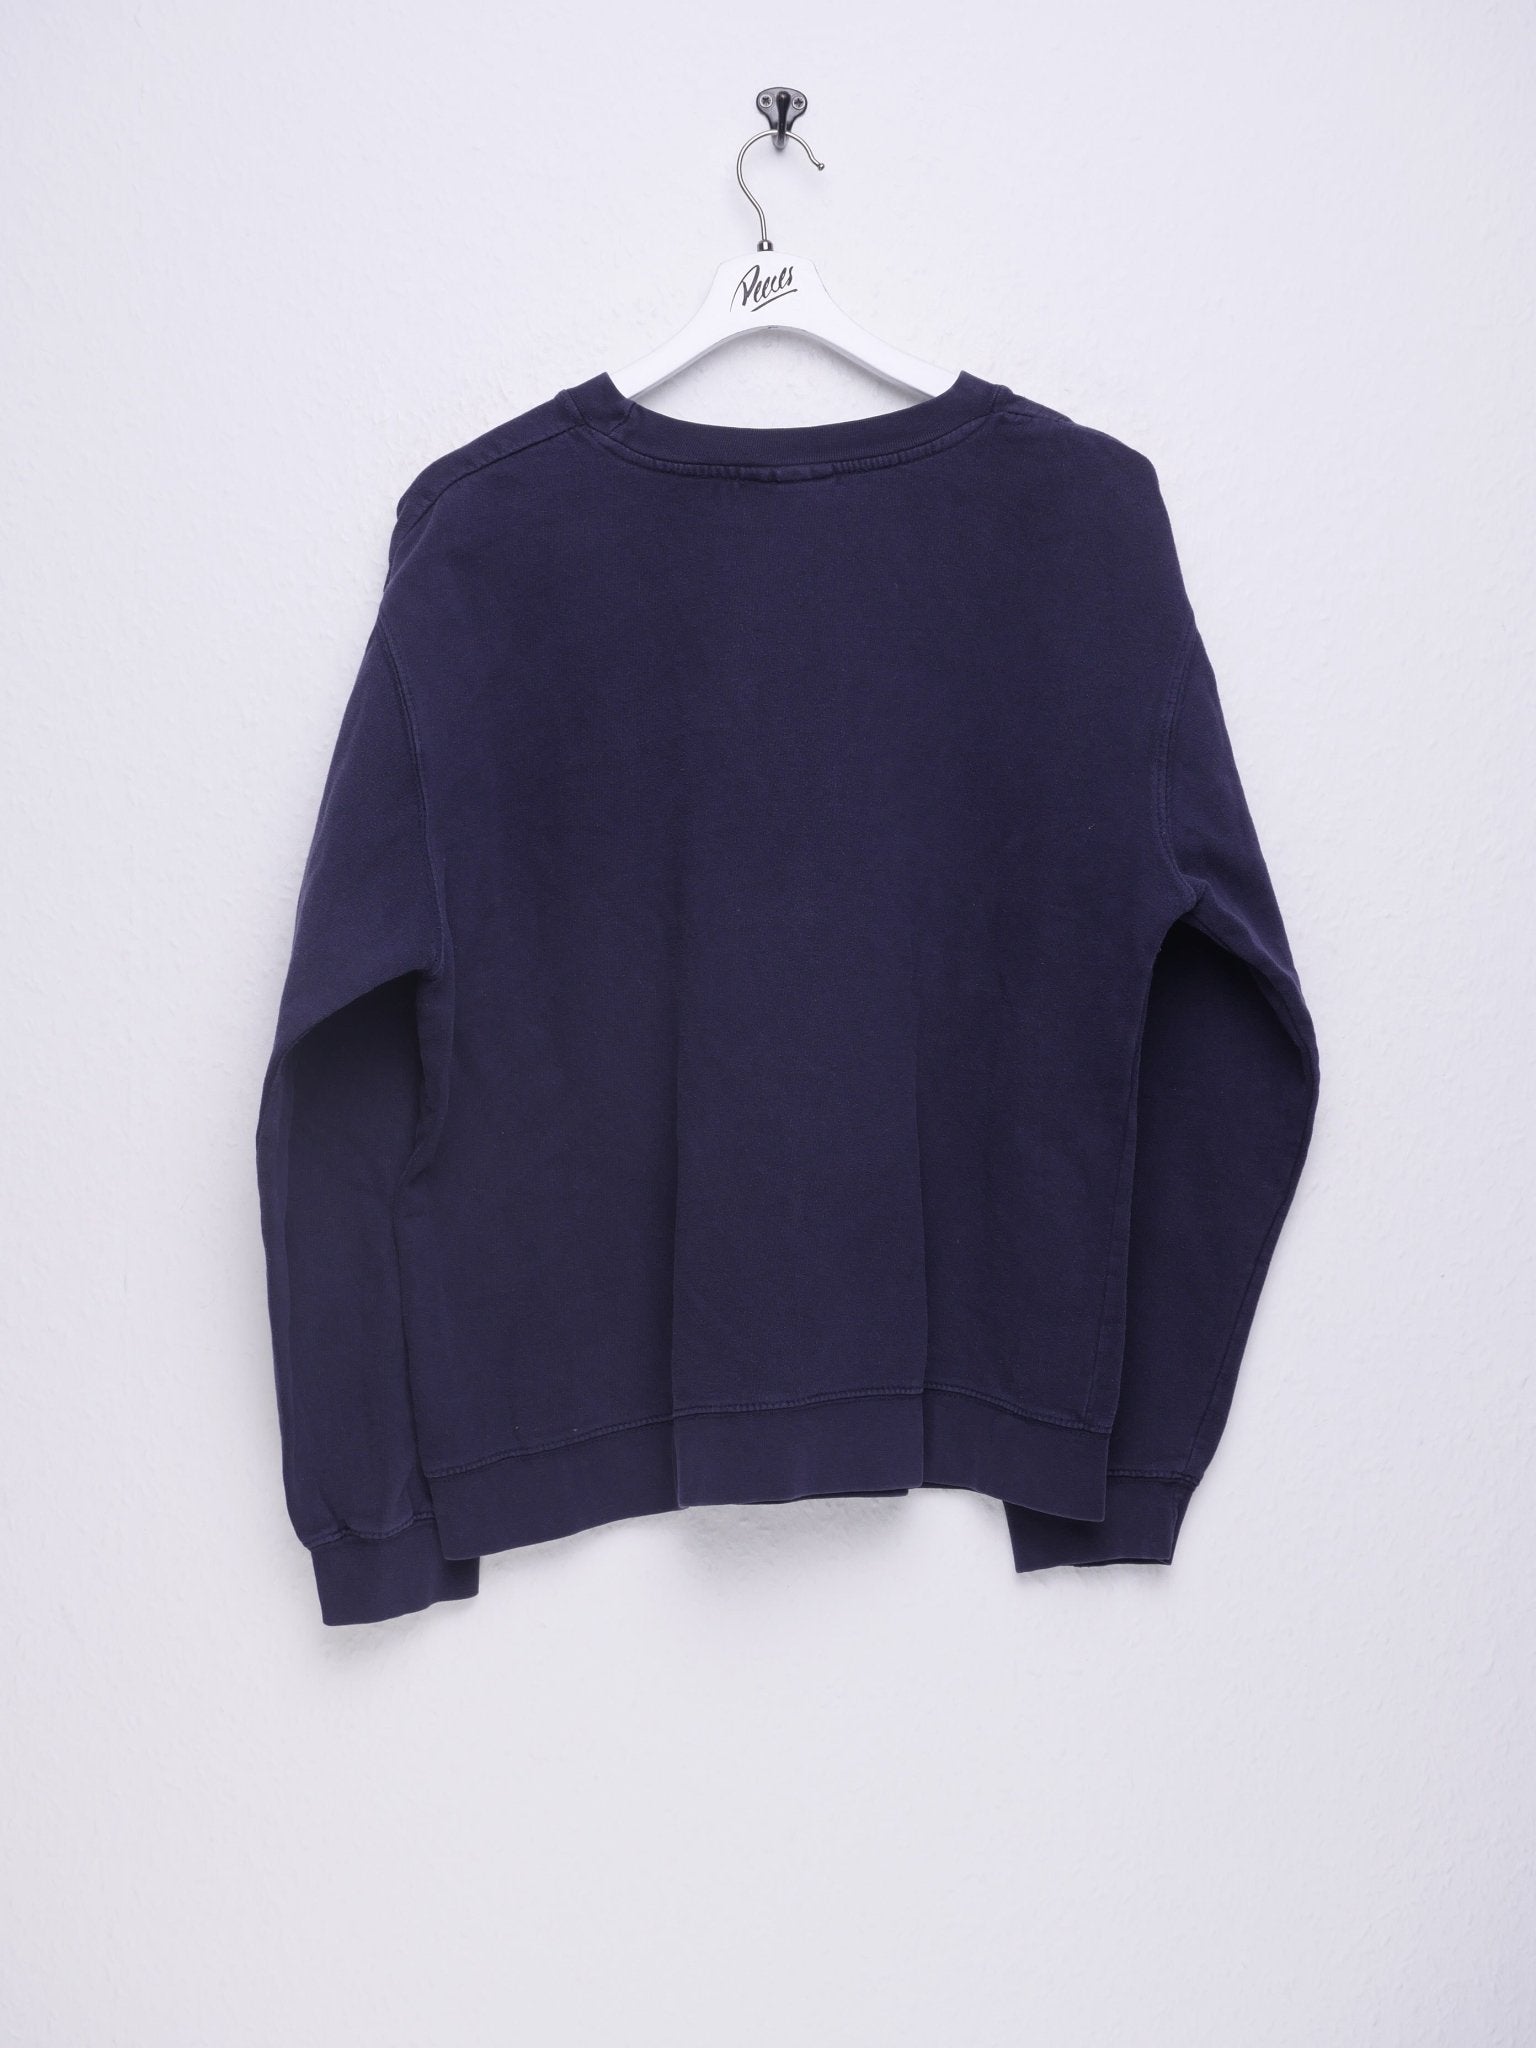 printed Logo washed navy Sweater - Peeces